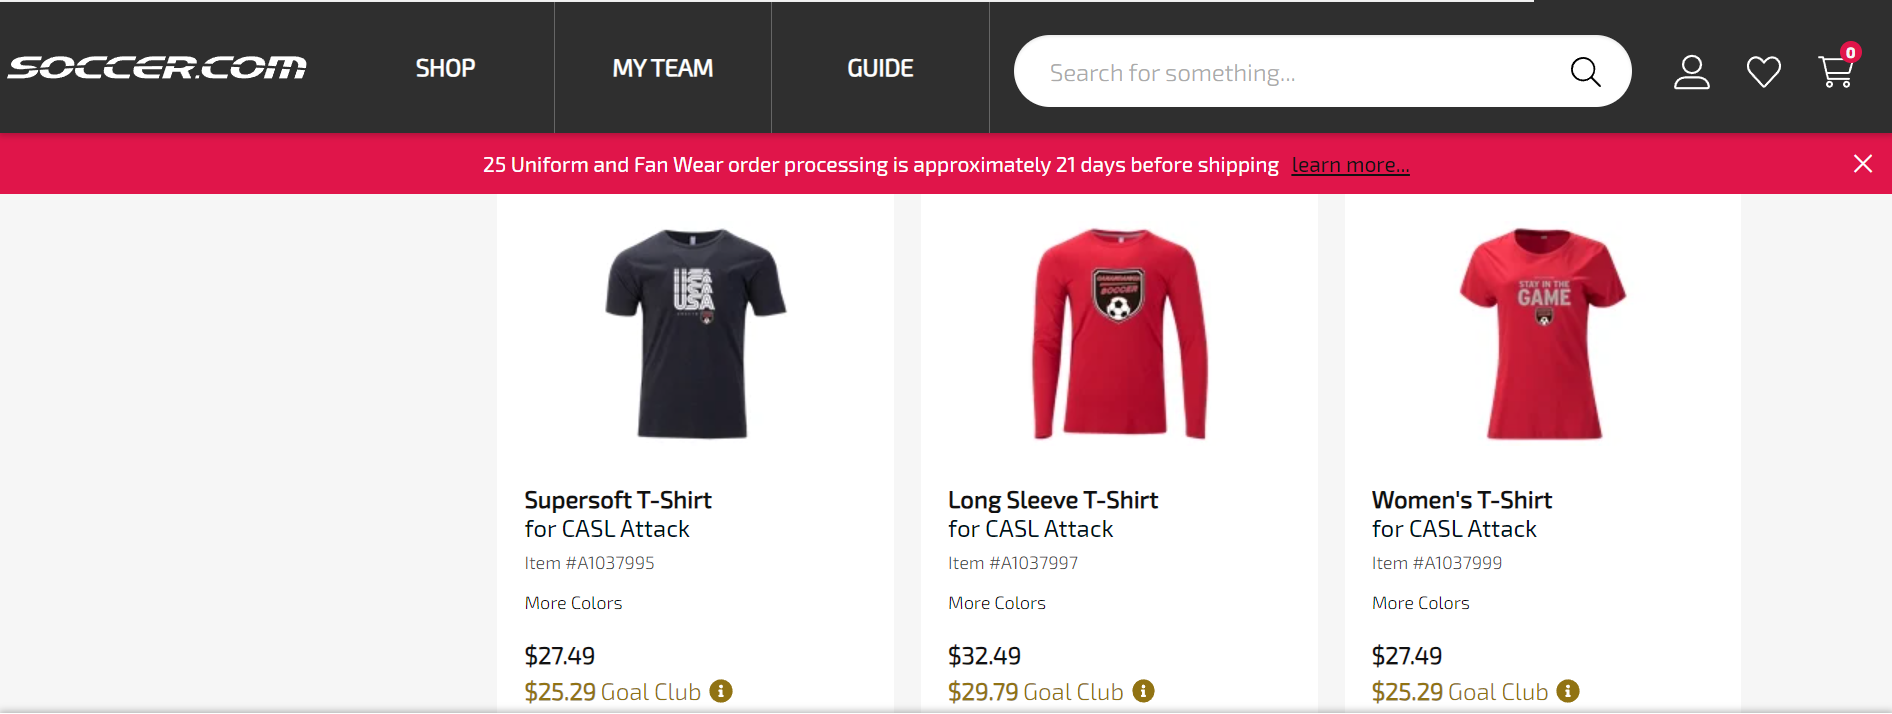 Visit CASL's Soccer.com store to purchase uniforms and fan gear.